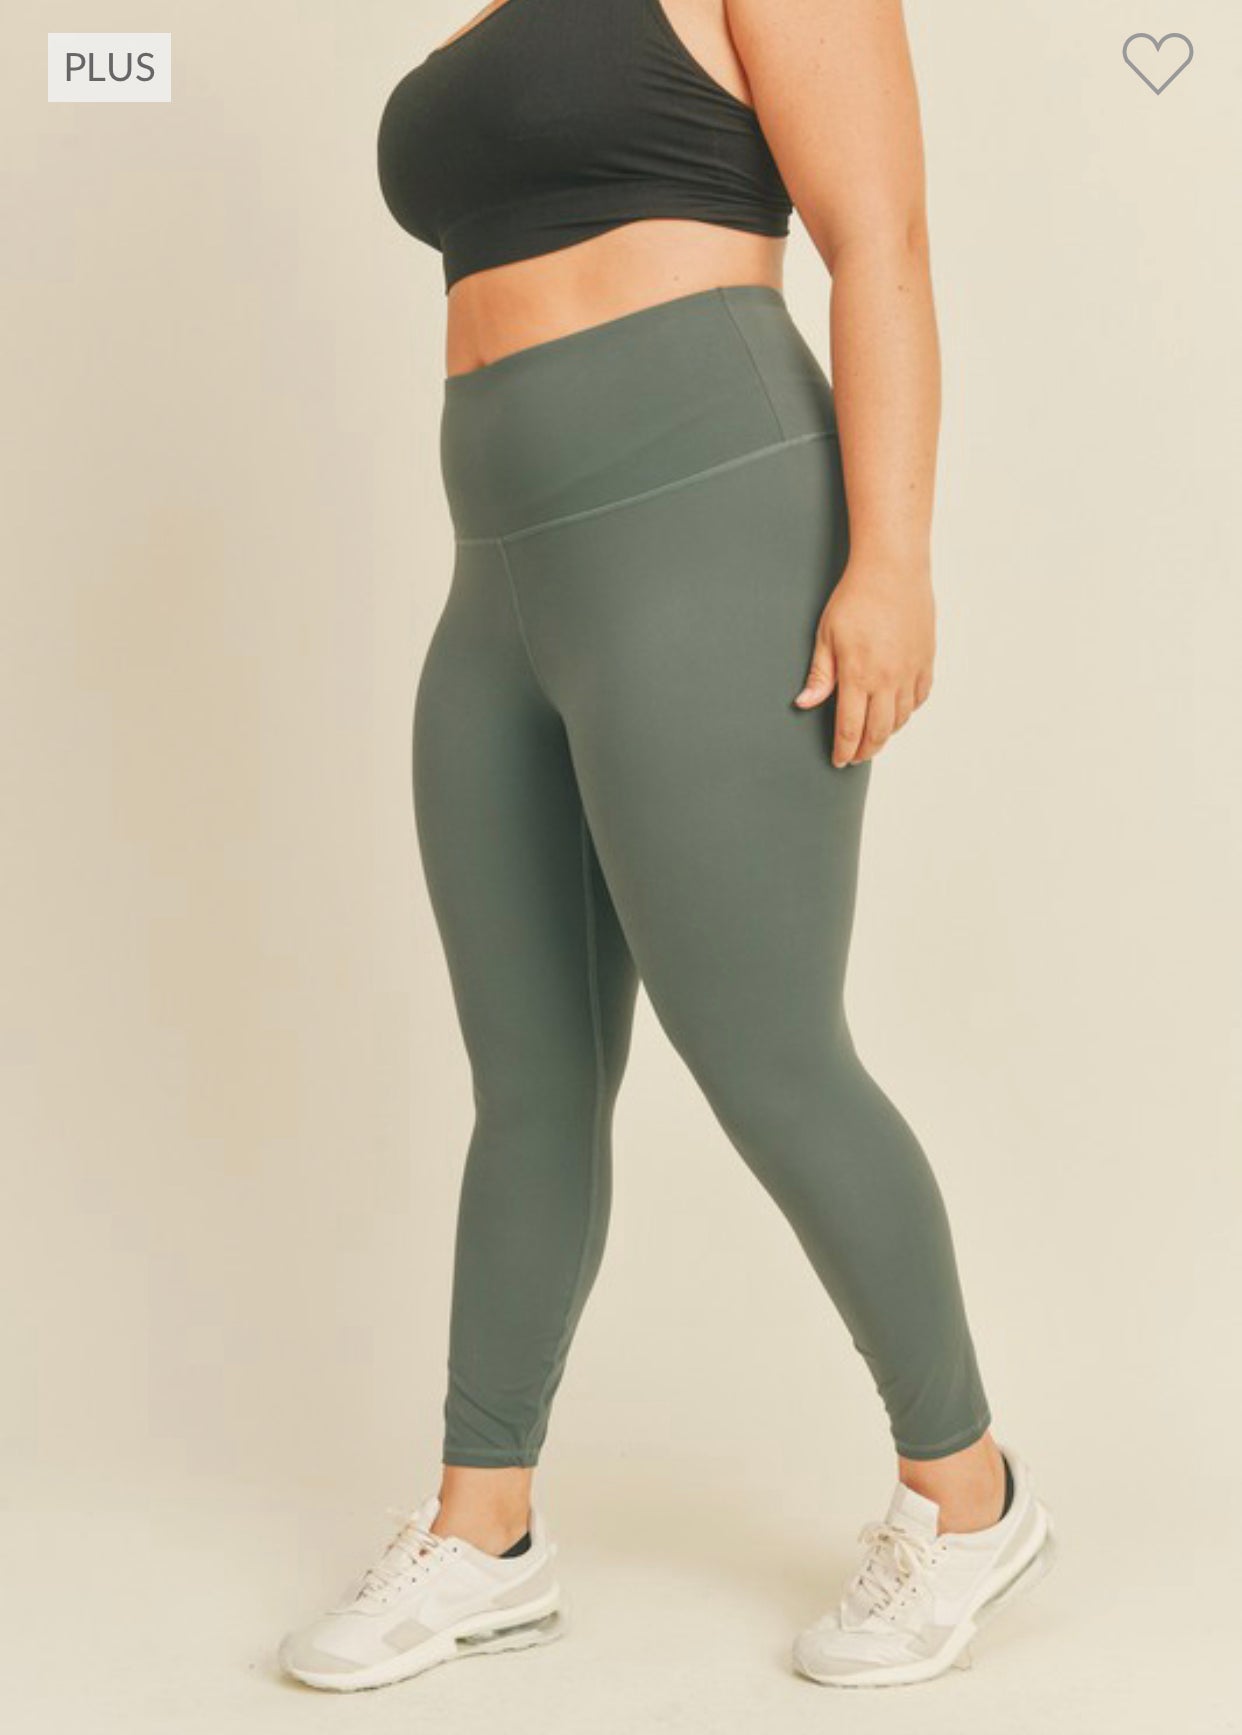 Stick With Your Dreams High Waisted Leggings- Forest Green